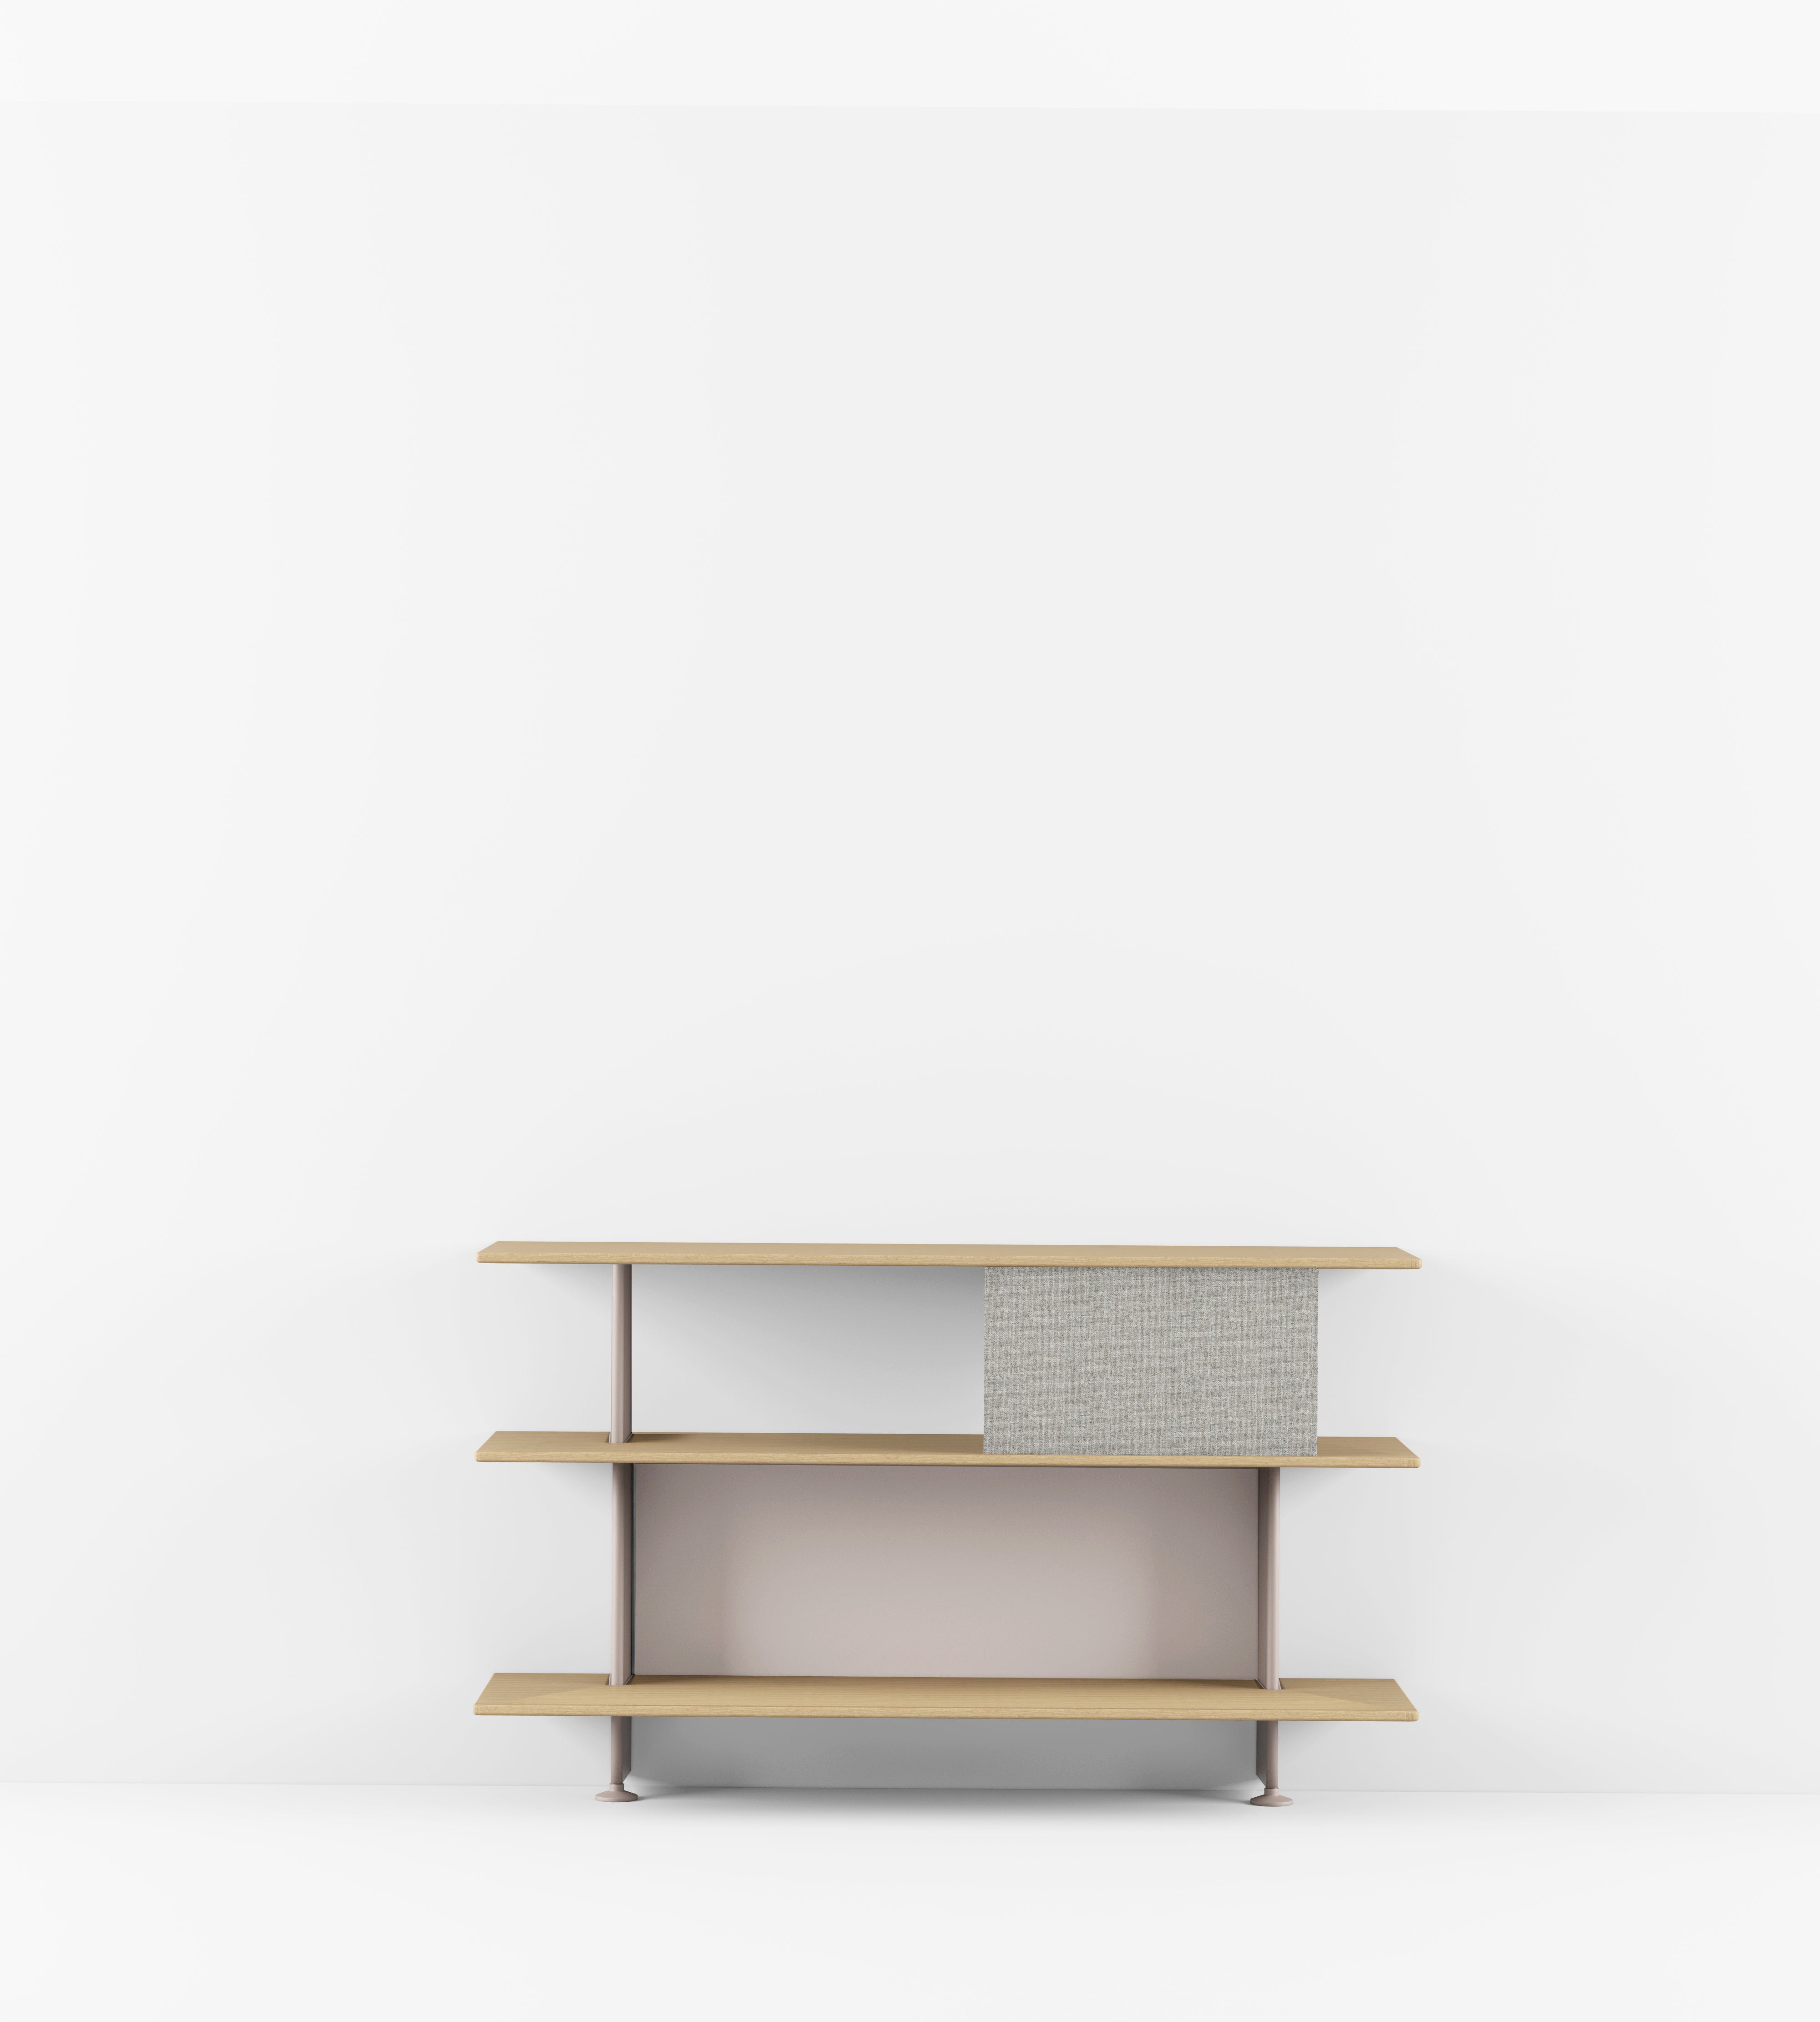 Bookshelf with vertical elements in lacquered aluminium and shelves in oak veneered multilayer plywood.
Finish in natural oak wood, lacquered (whitened, Canaletto walnut, dark, ash grey) or coloured stains. Available in two depths: 28 cm or 38